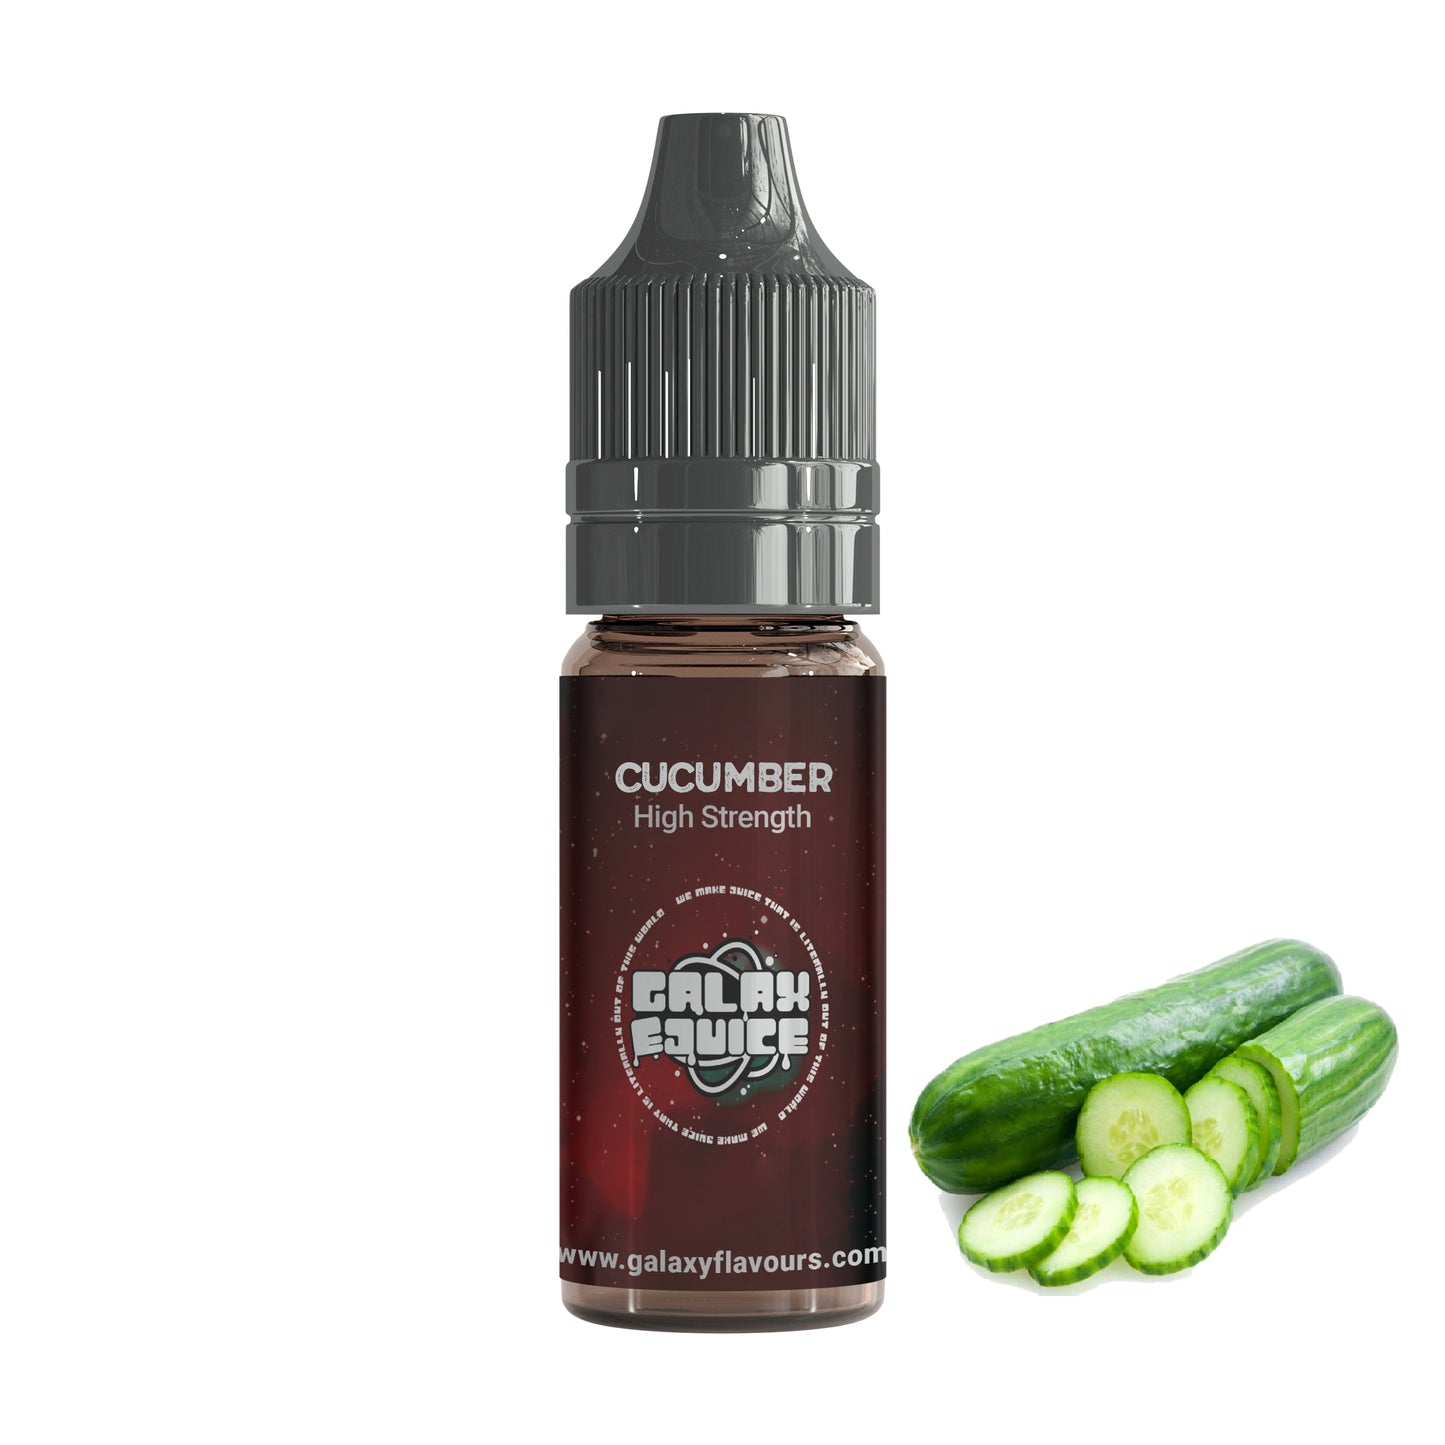 Cucumber High Strength Professional Flavouring.